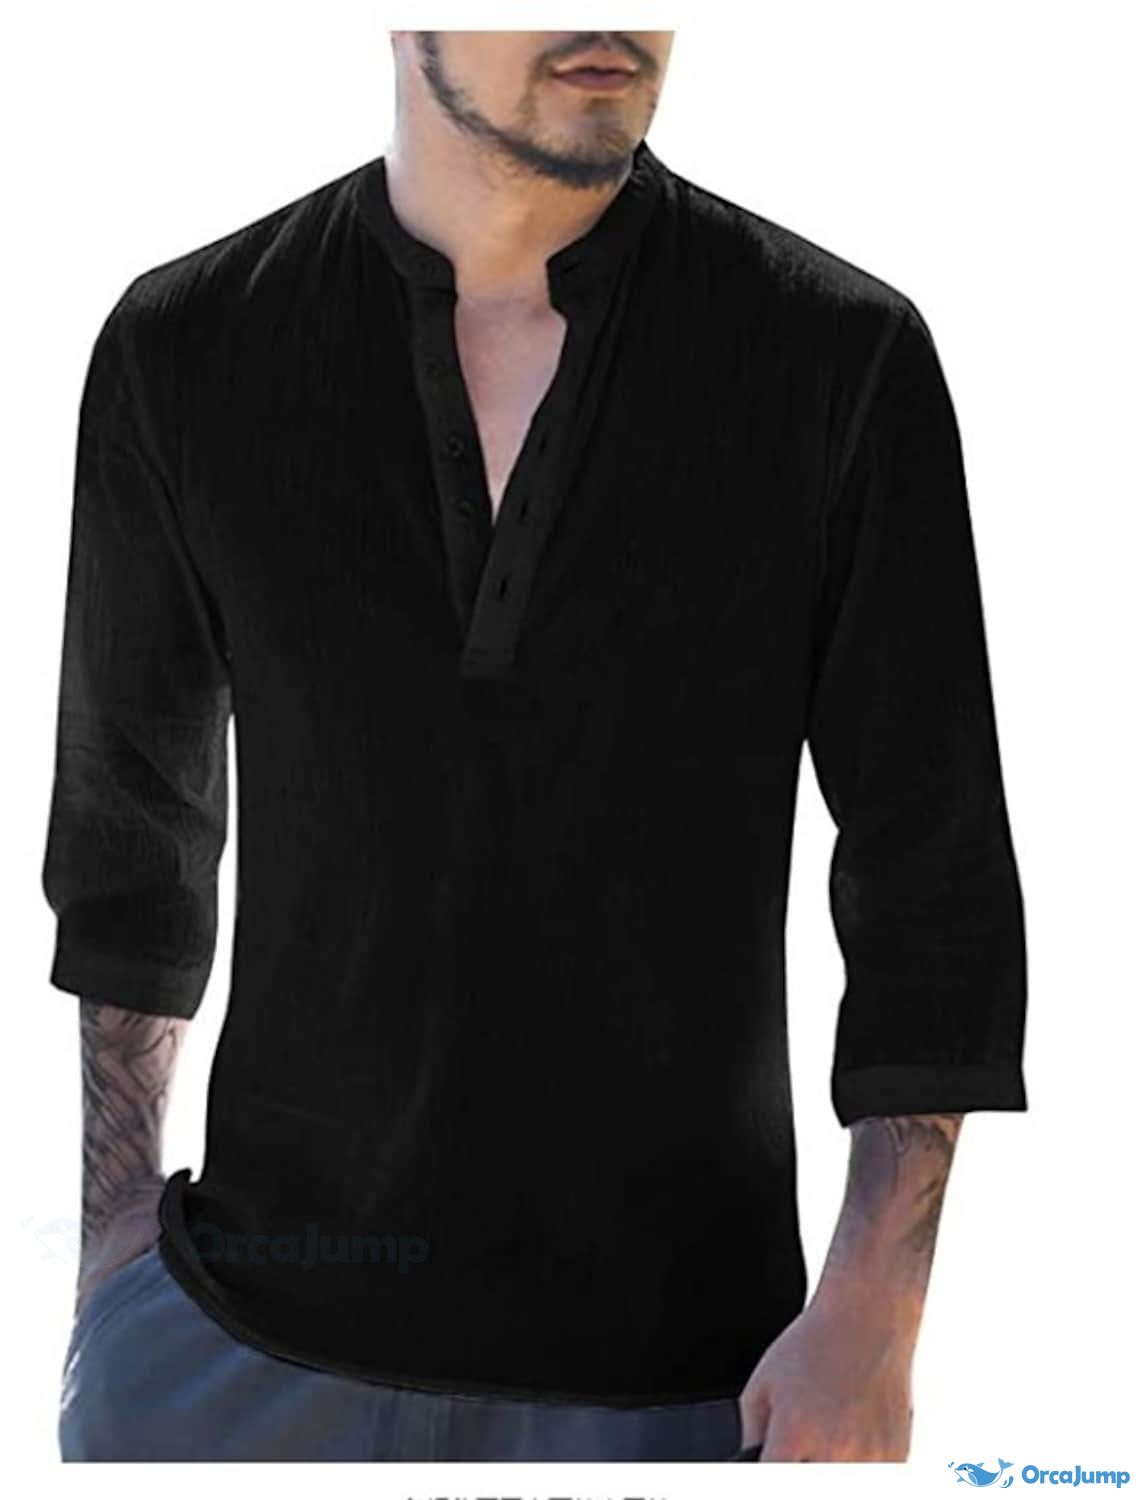 OrcaJump - Mens Solid Color Stand-Up Collar Henley Button-Down Shirt